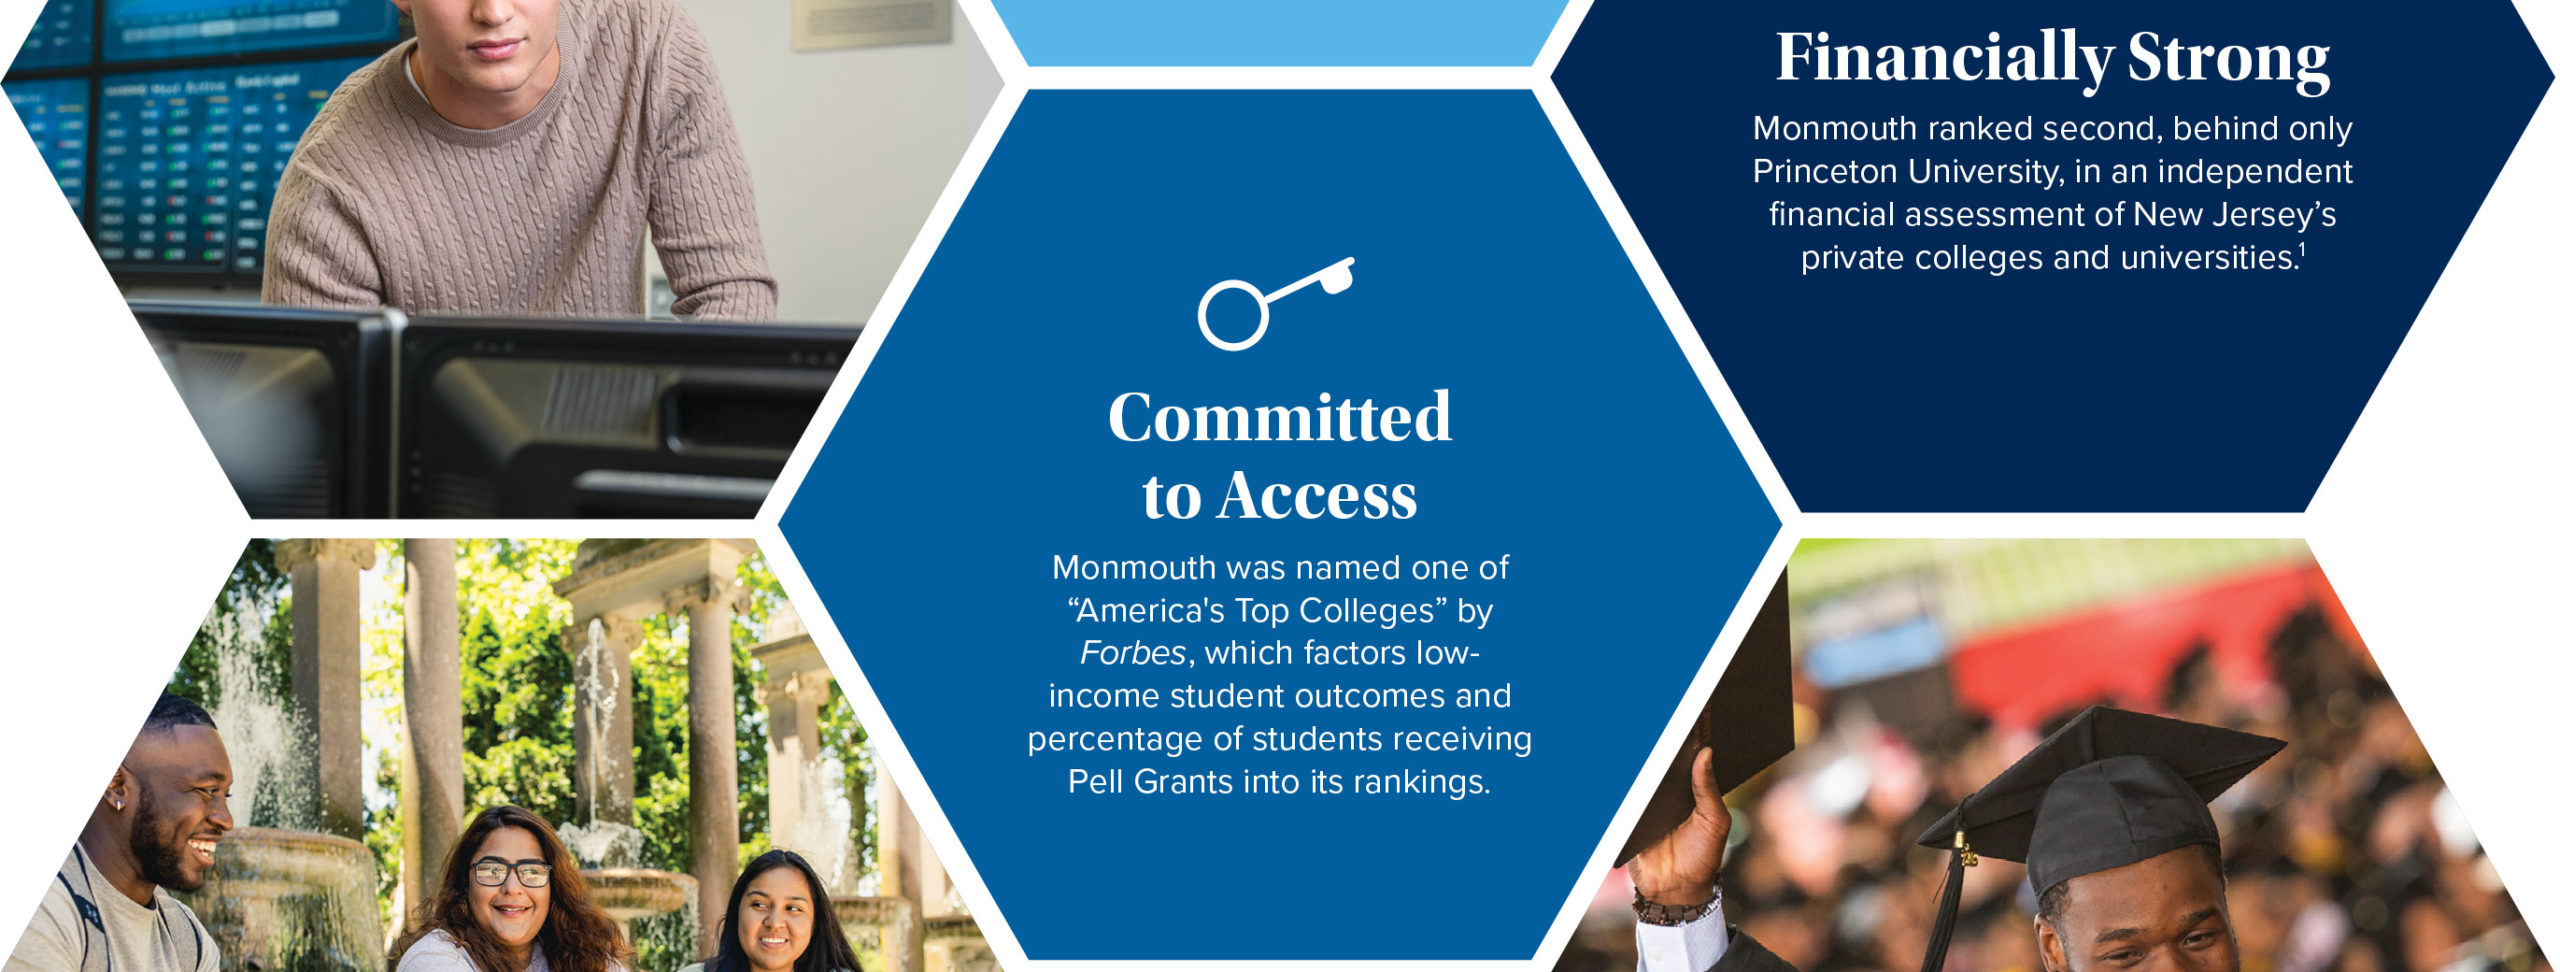 Committed to Access Monmouth was named one of “America's Top Colleges” by Forbes, which factors low-income student outcomes and percentage of students receiving Pell Grants into its rankings. Financially Strong Monmouth ranked second, behind only Princeton University, in an independent financial assessment of New Jersey’s private colleges and universities.1